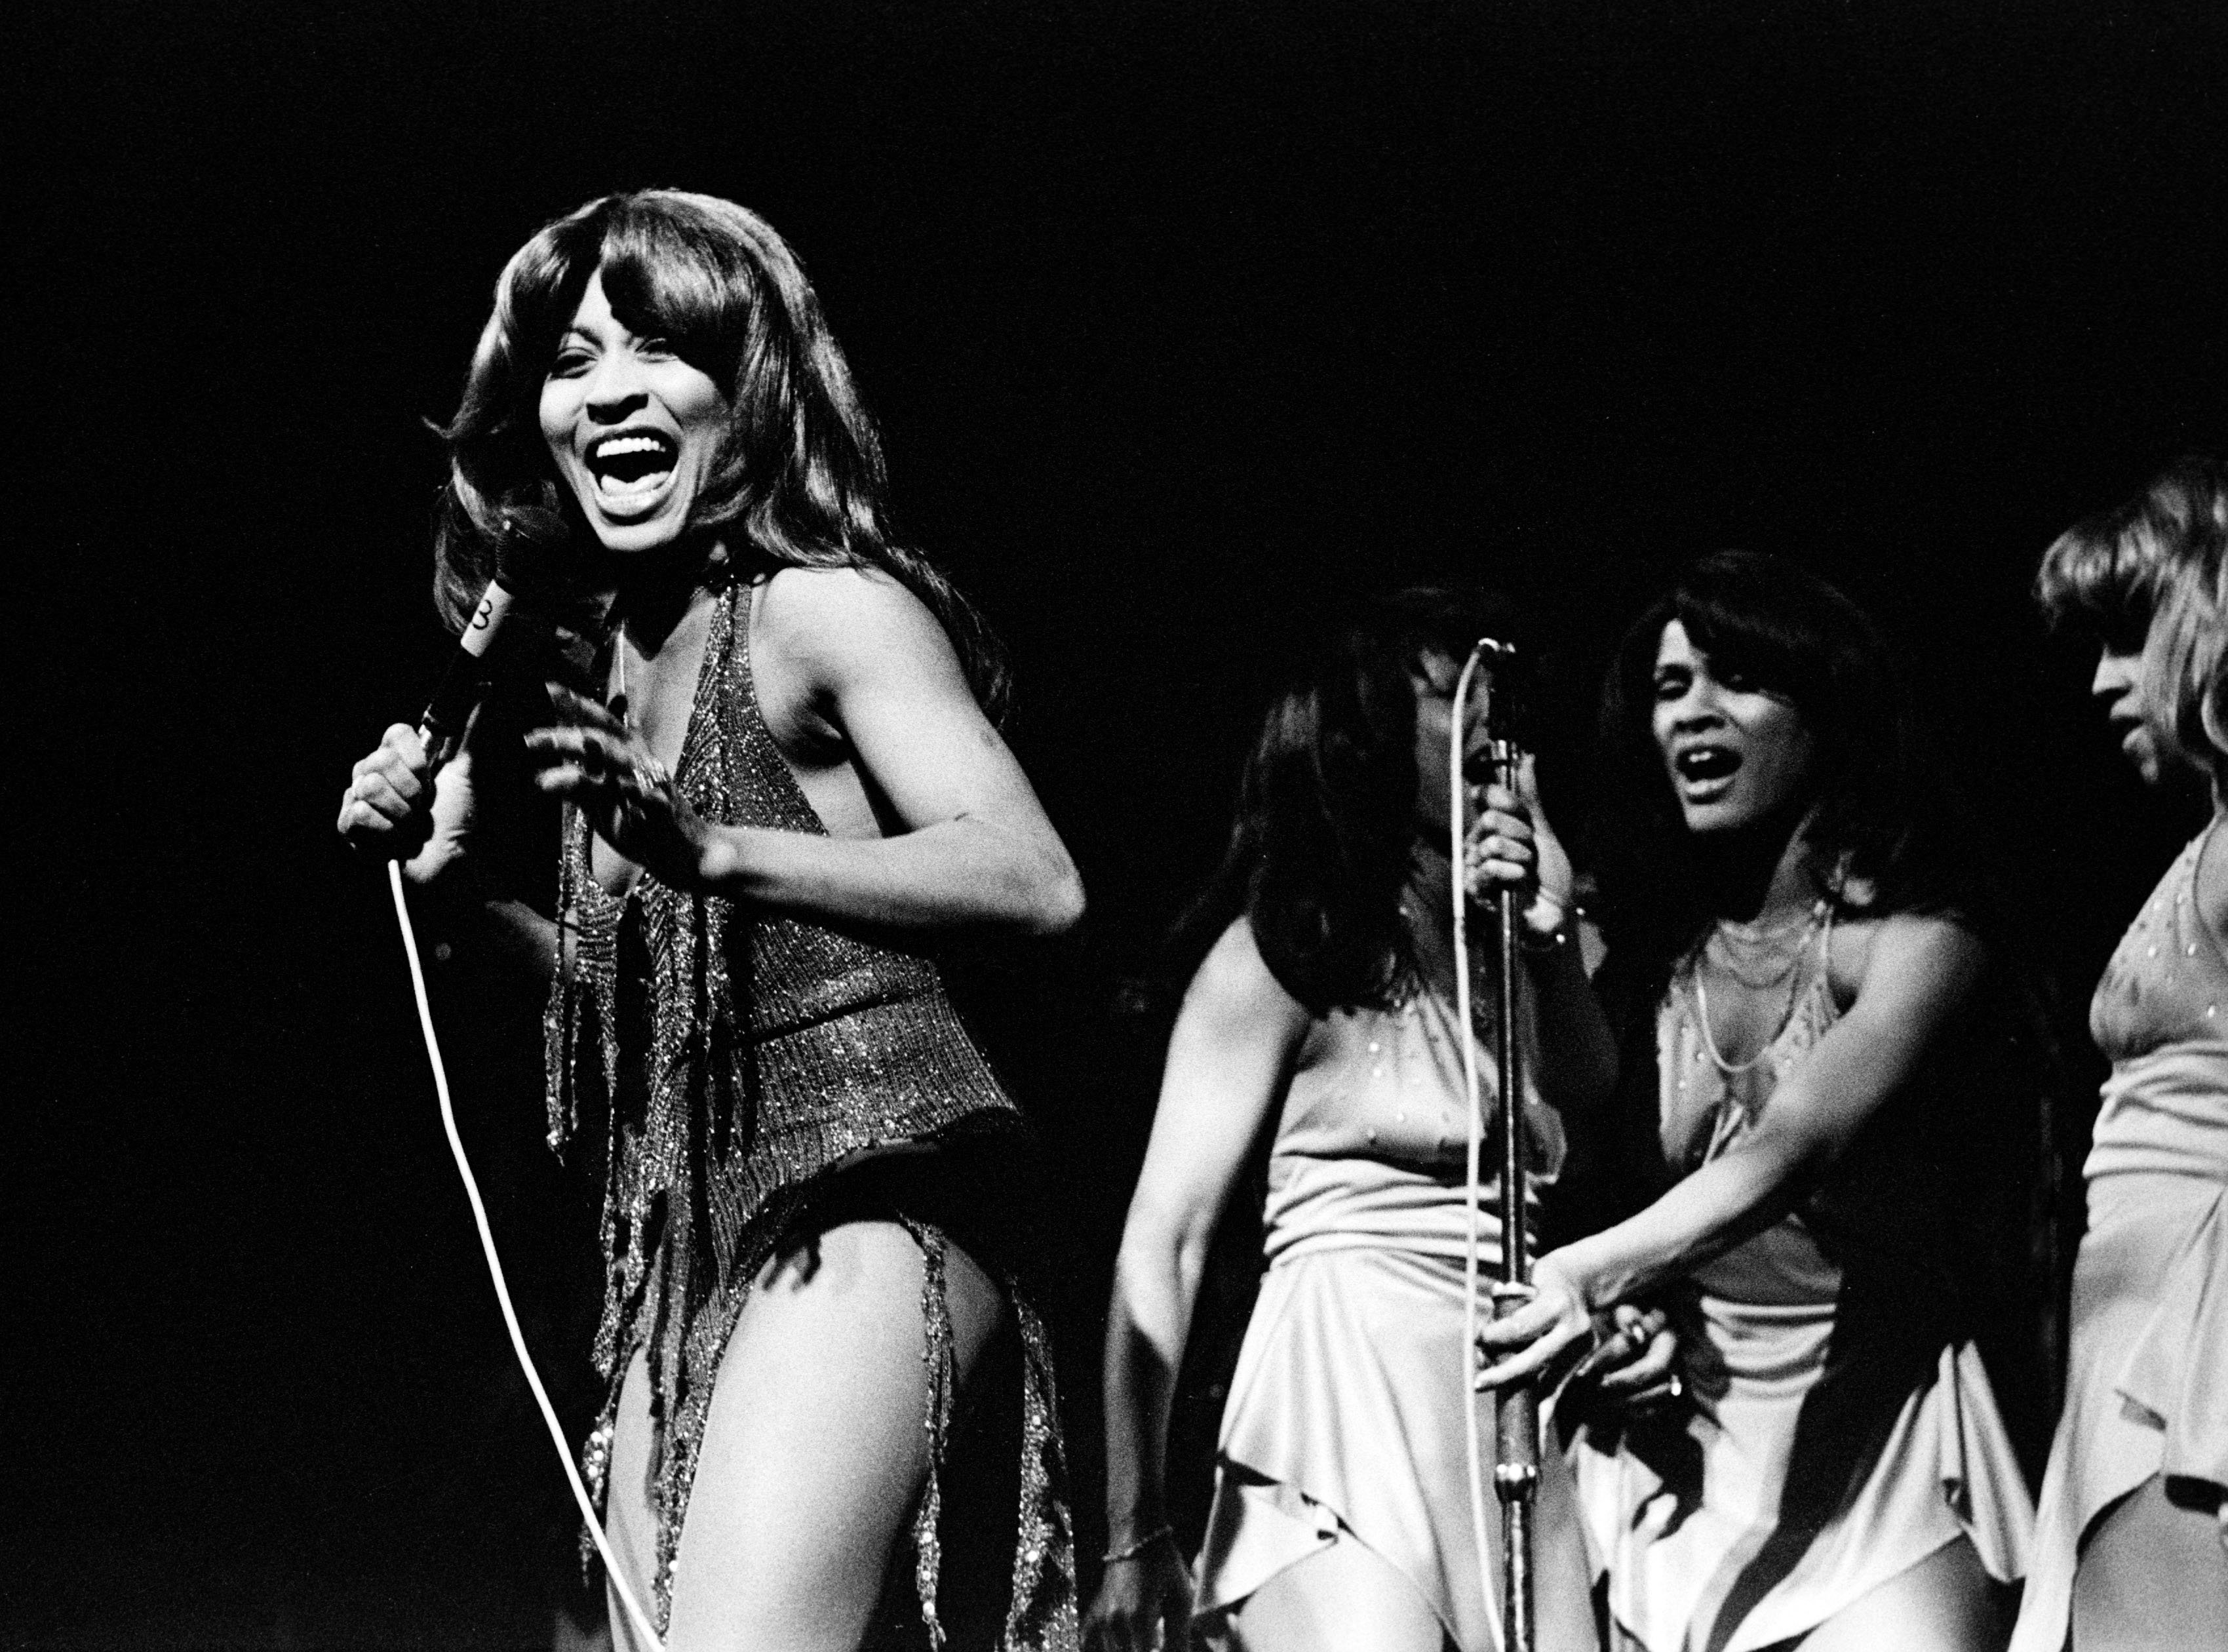 A black and white photo of Tina Turner and her background singers in the Netherlands in 1975.